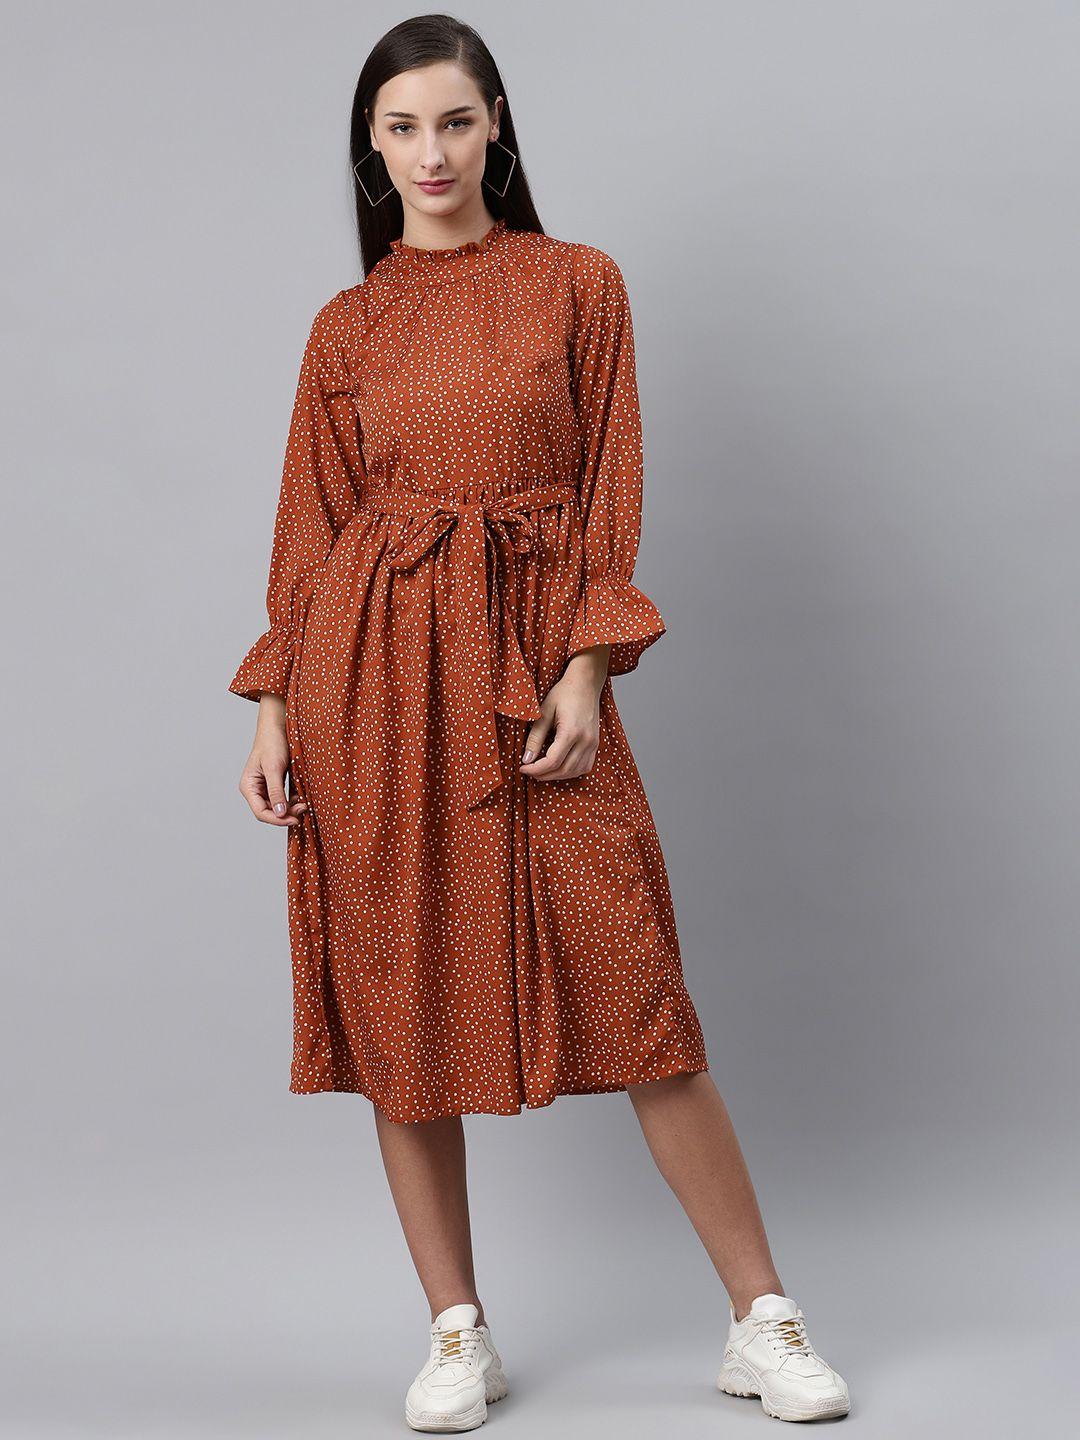 pluss women rust brown & white dotted print a-line dress with belt